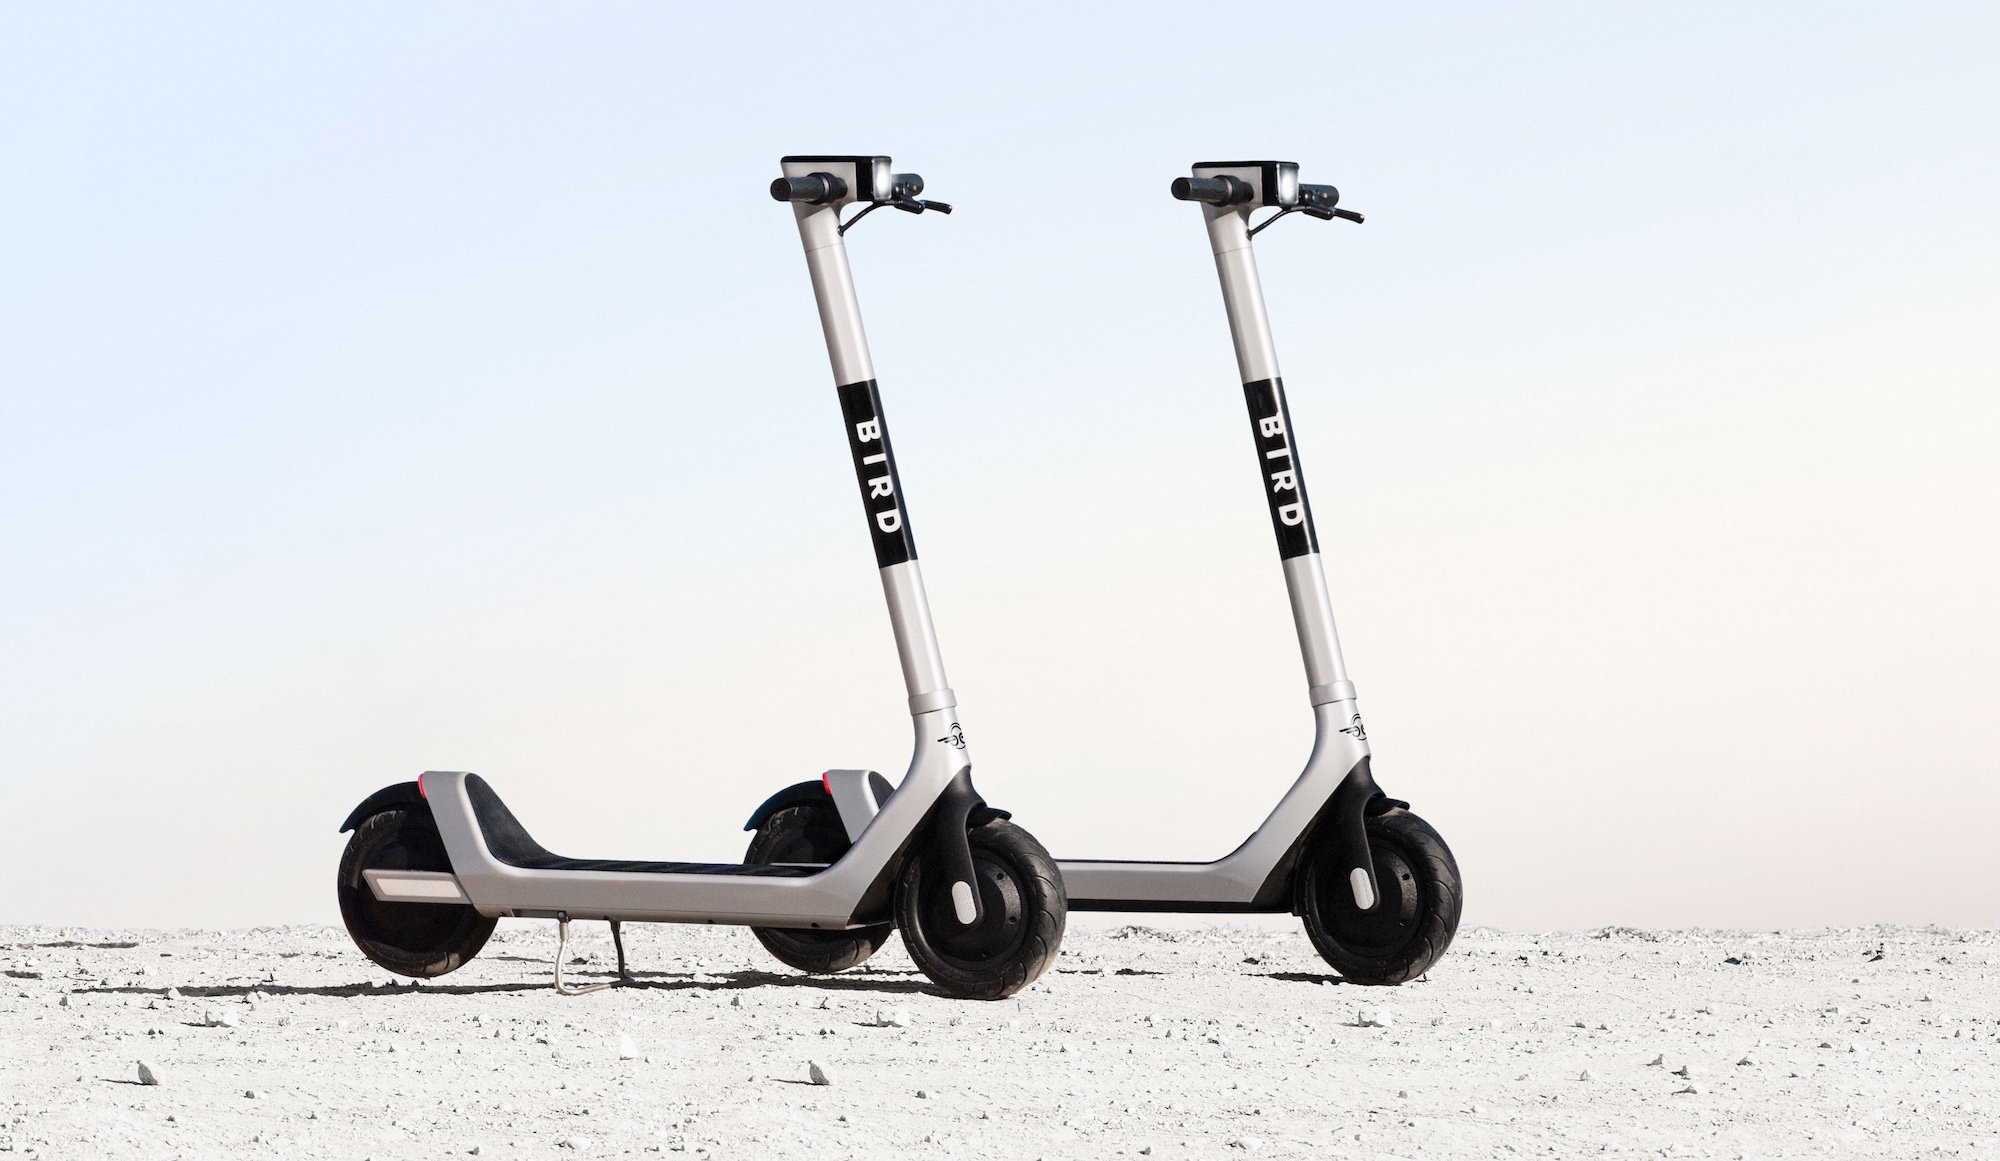 Bird's new futuristic Bird Two electric scooter ups the ante for shared